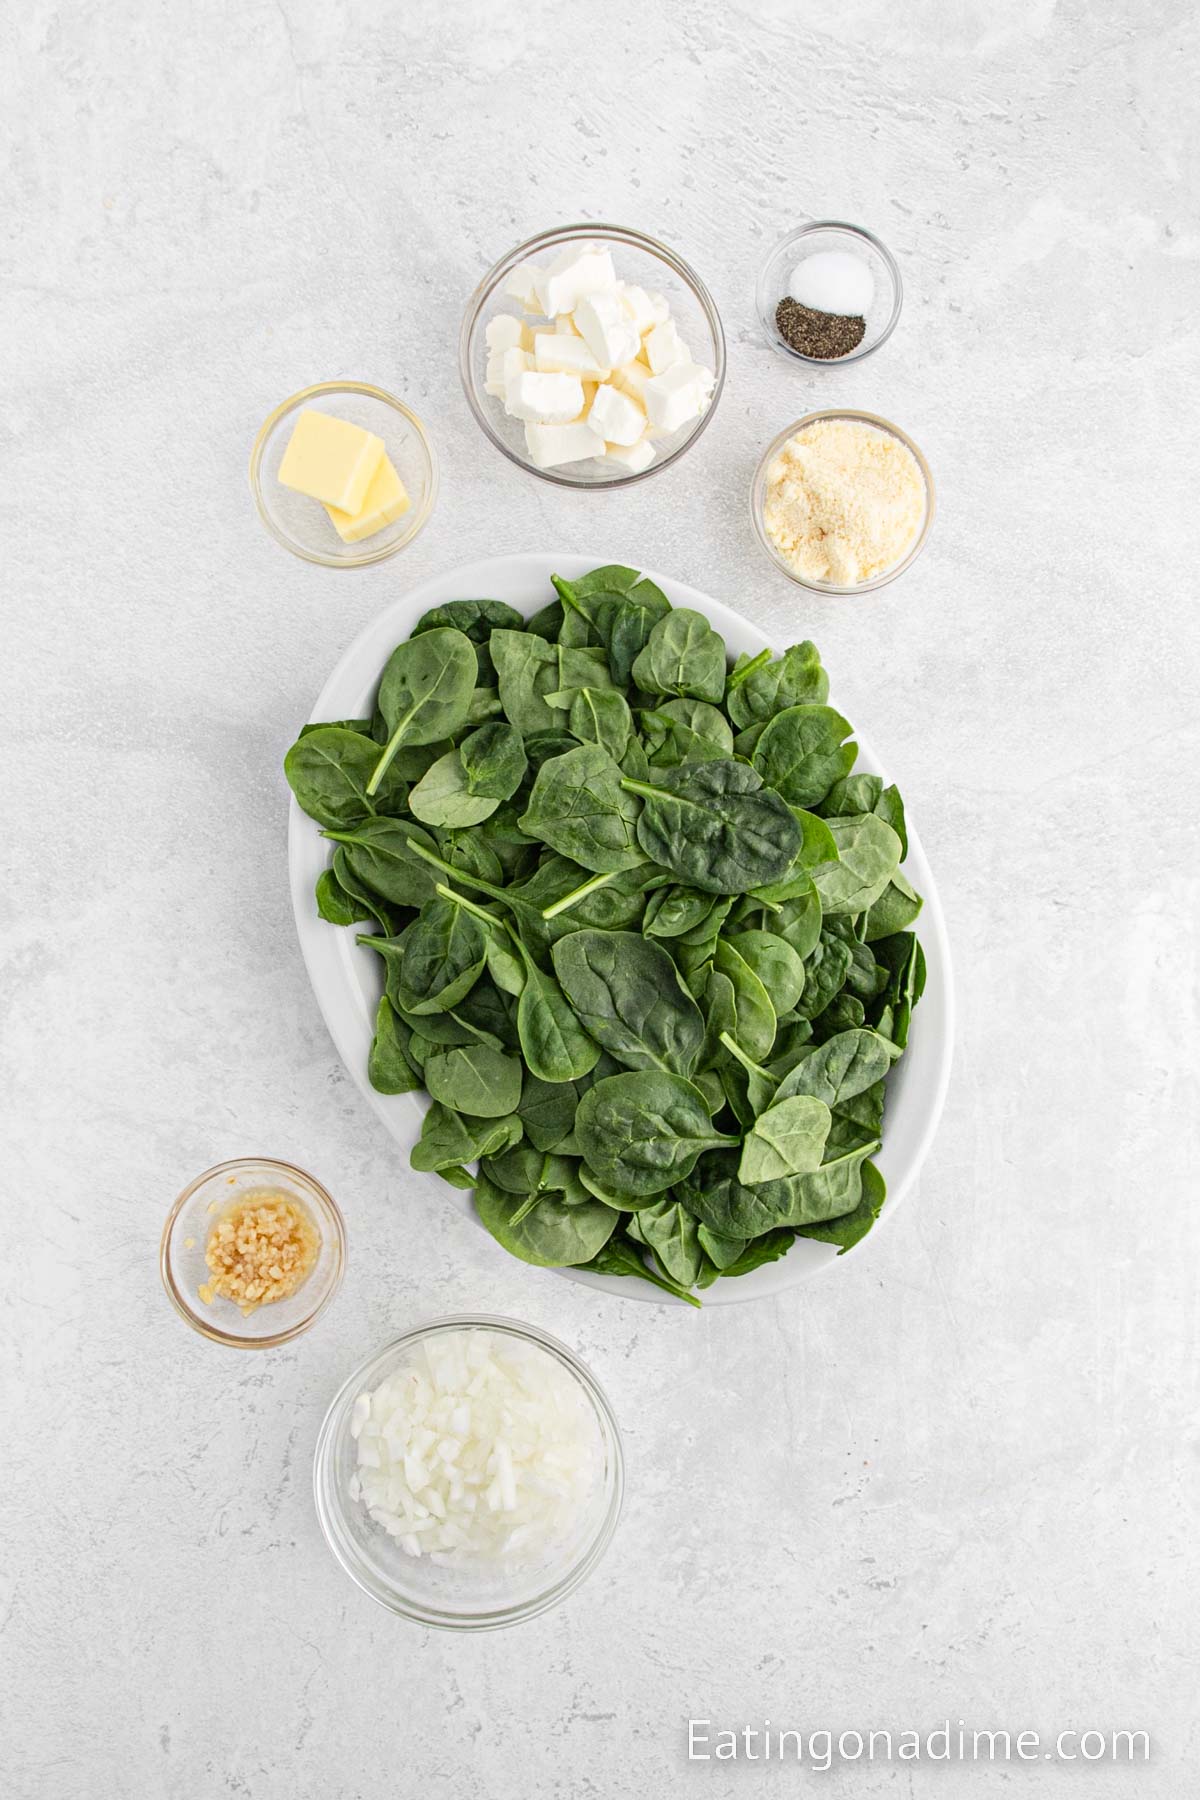 Ingredients needed for creamed spinach